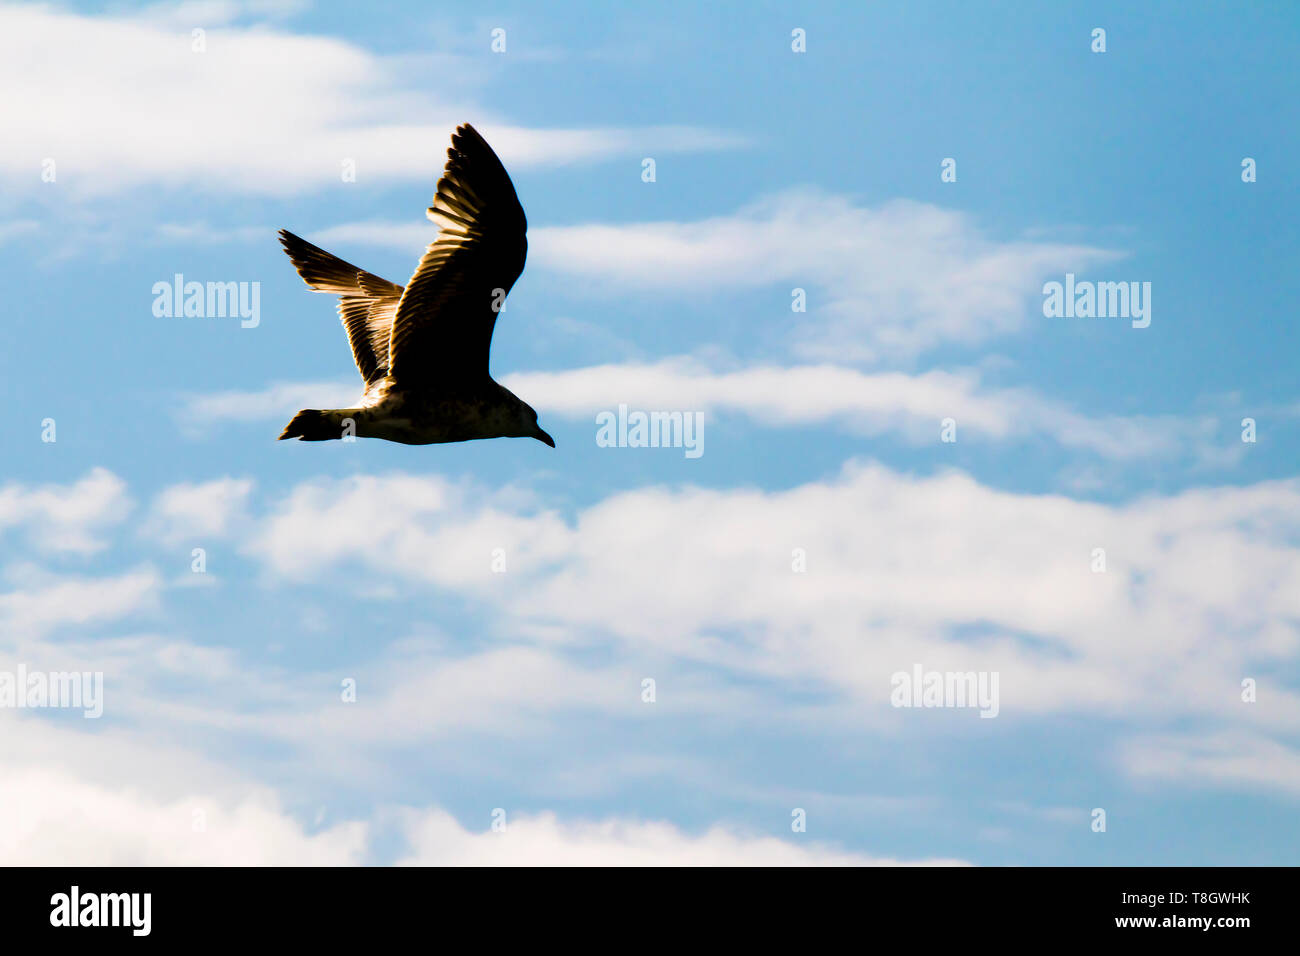 Silhouette of one seagull flying in the bright blue sky with white clouds Stock Photo